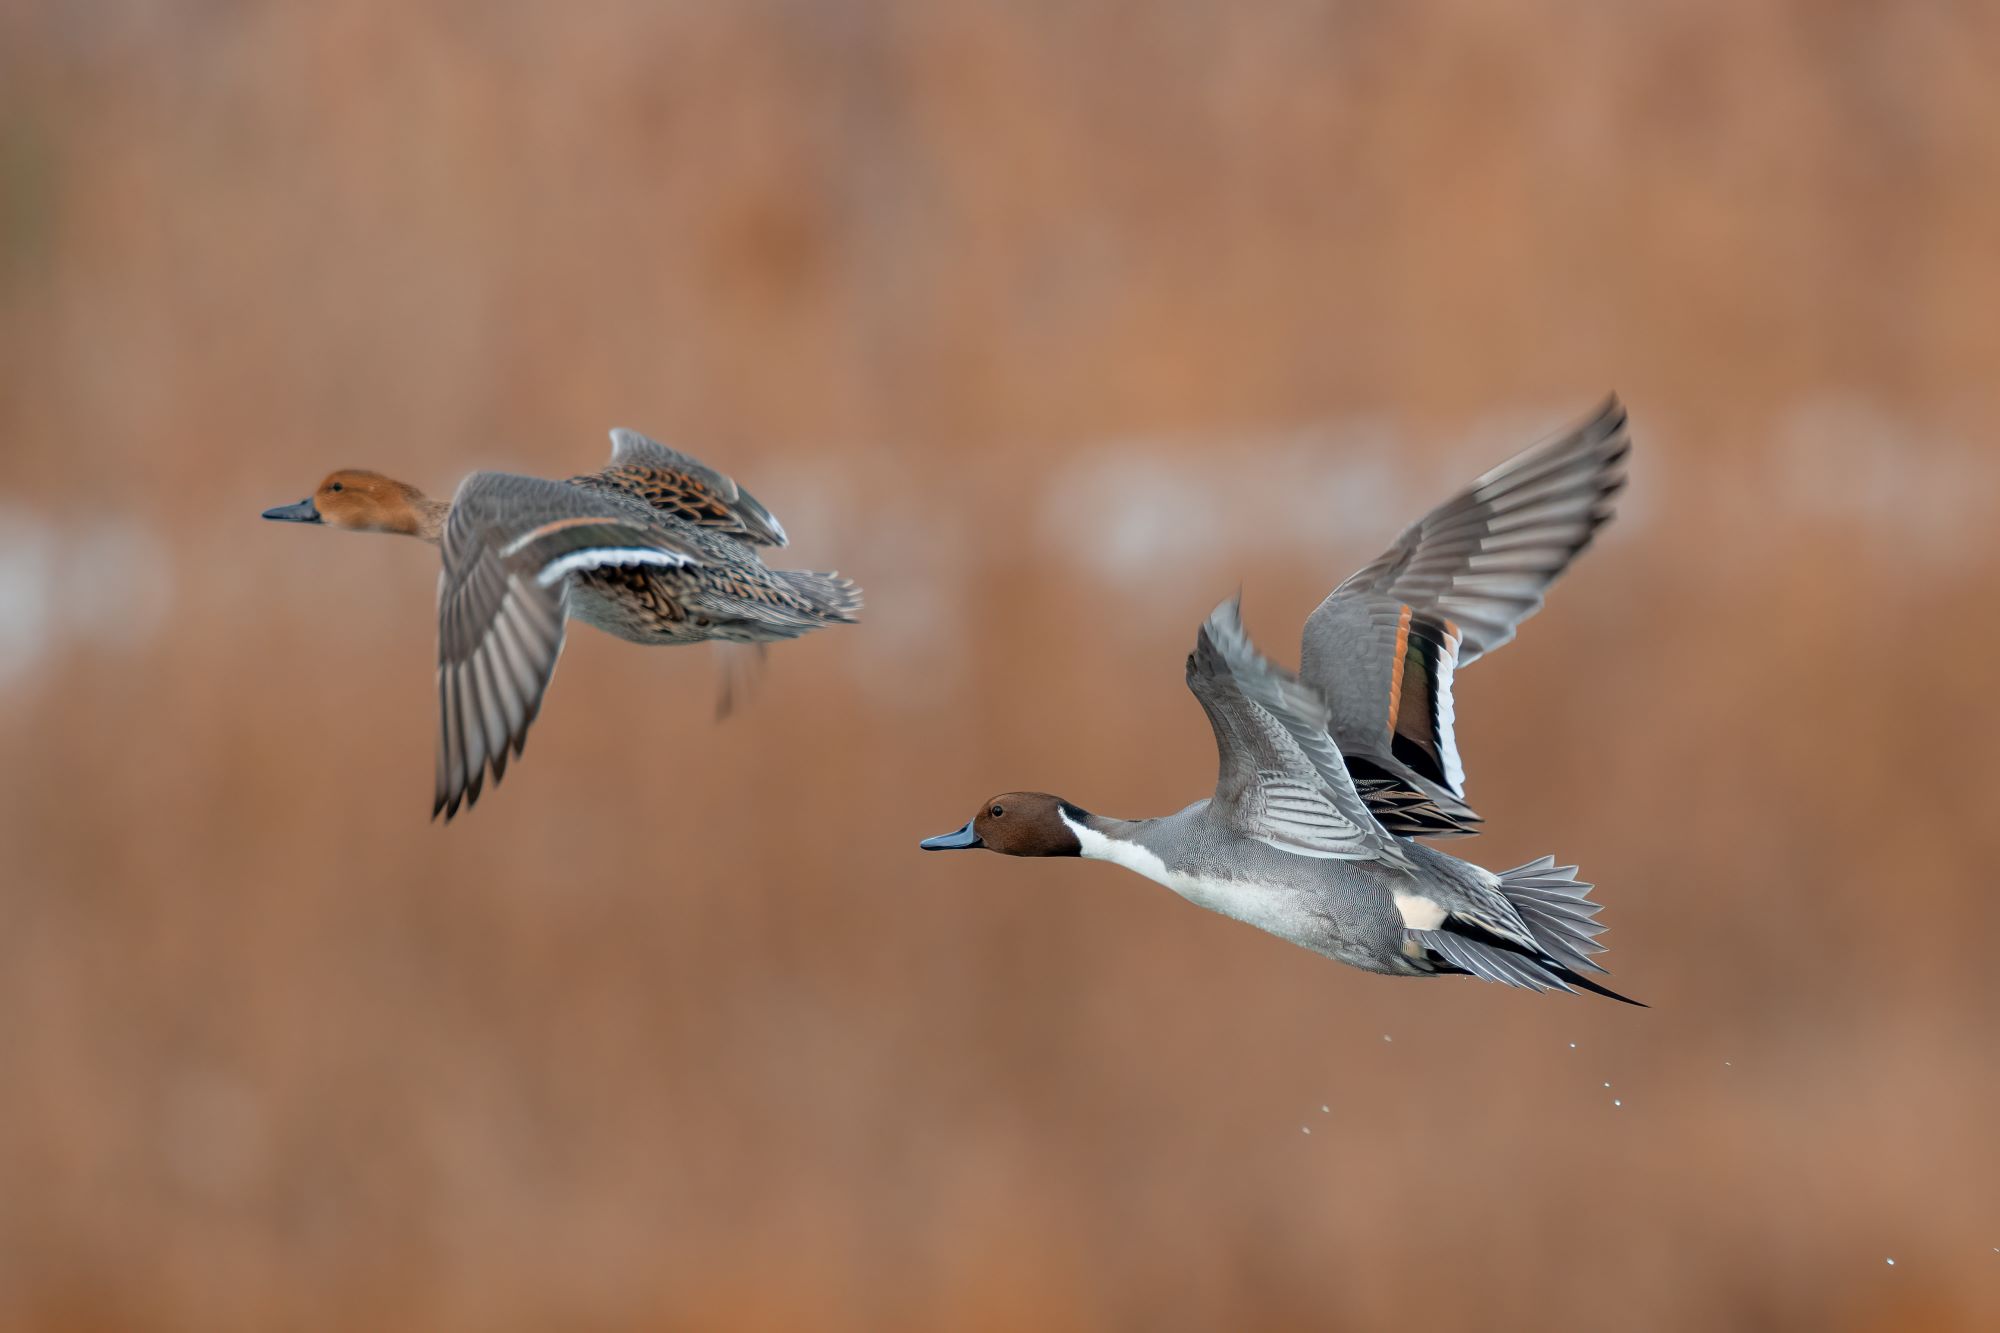 A pair of northern pintails in flight above their wetland habitat.